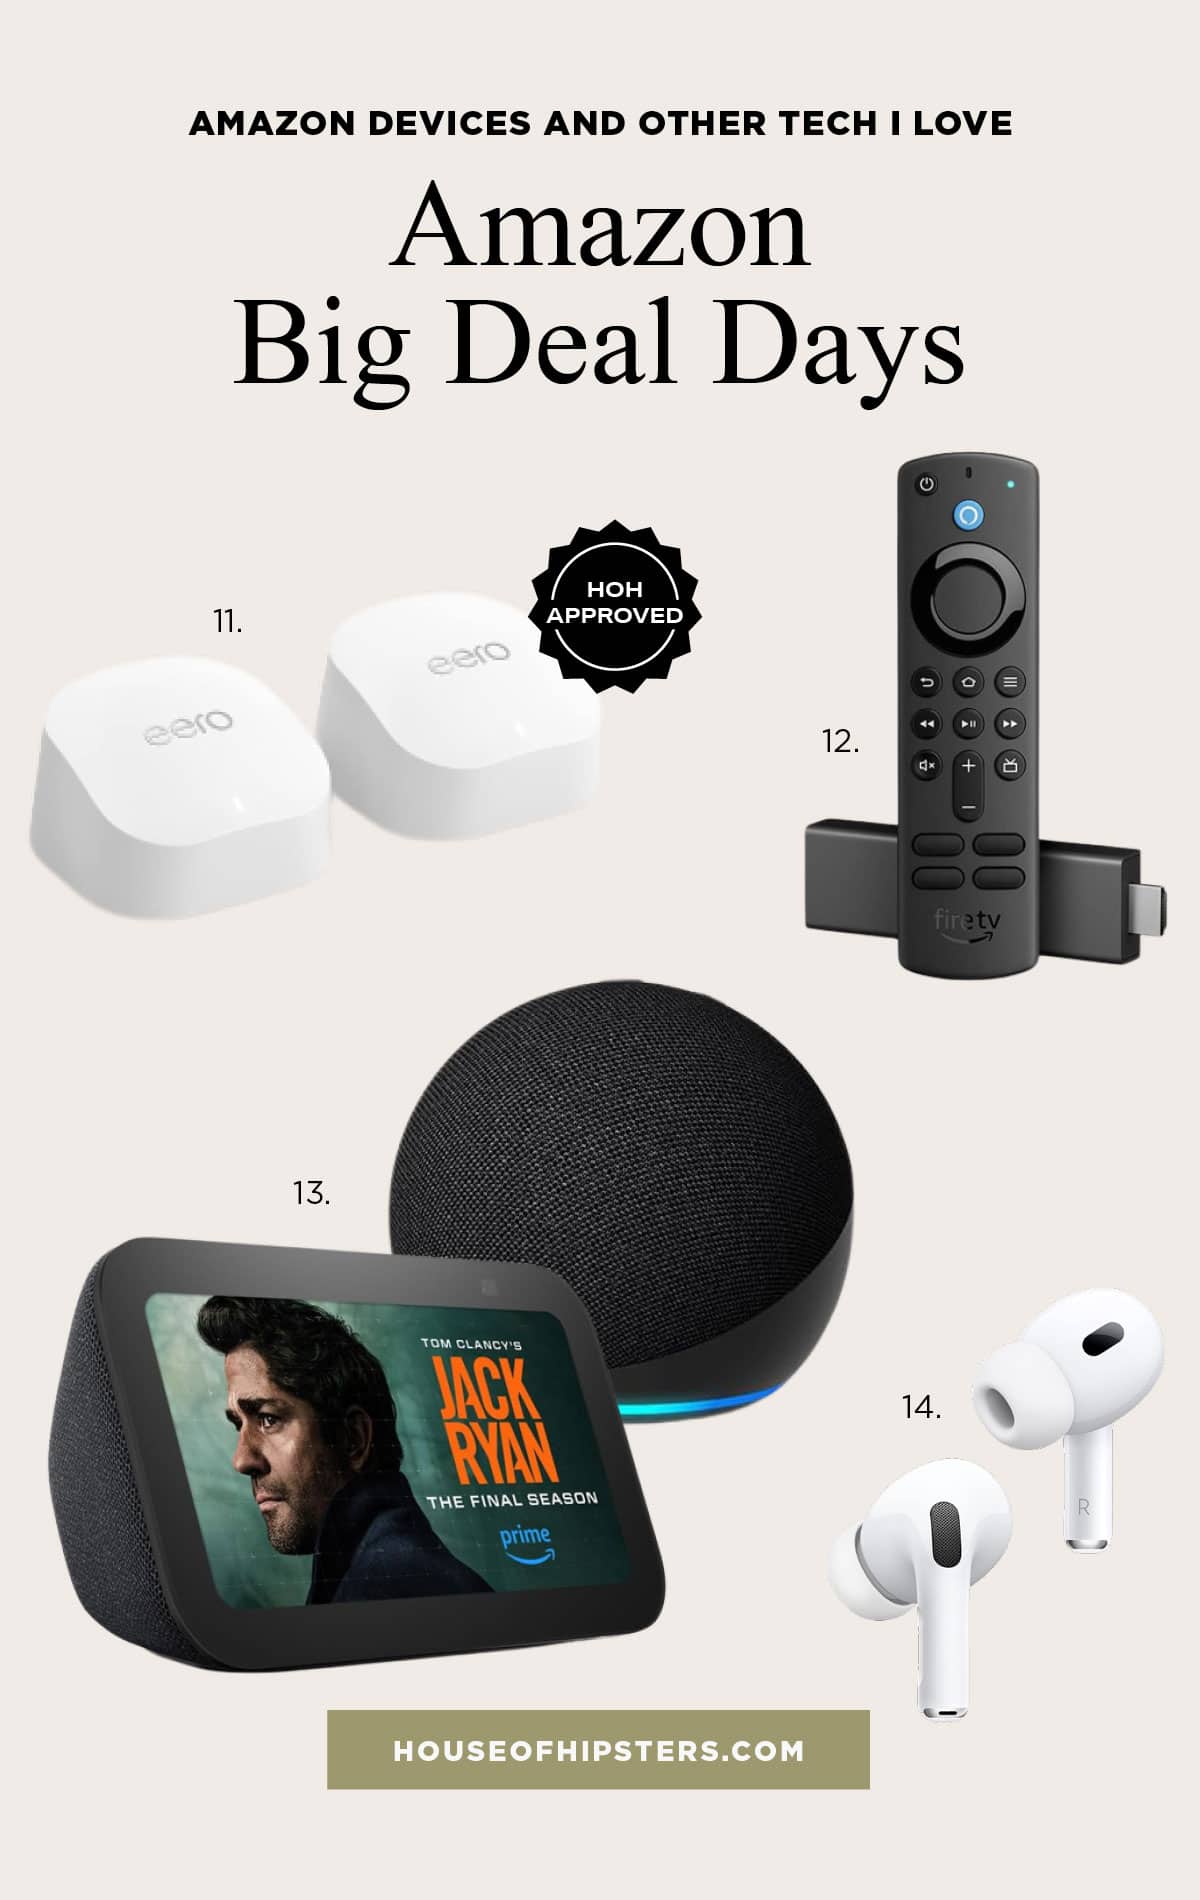 Best of Smart Home and Tech On Amazon - Amazon Prime Big Deal Days is happening right now and these are the best Amazon smart home and tech products you need to know about